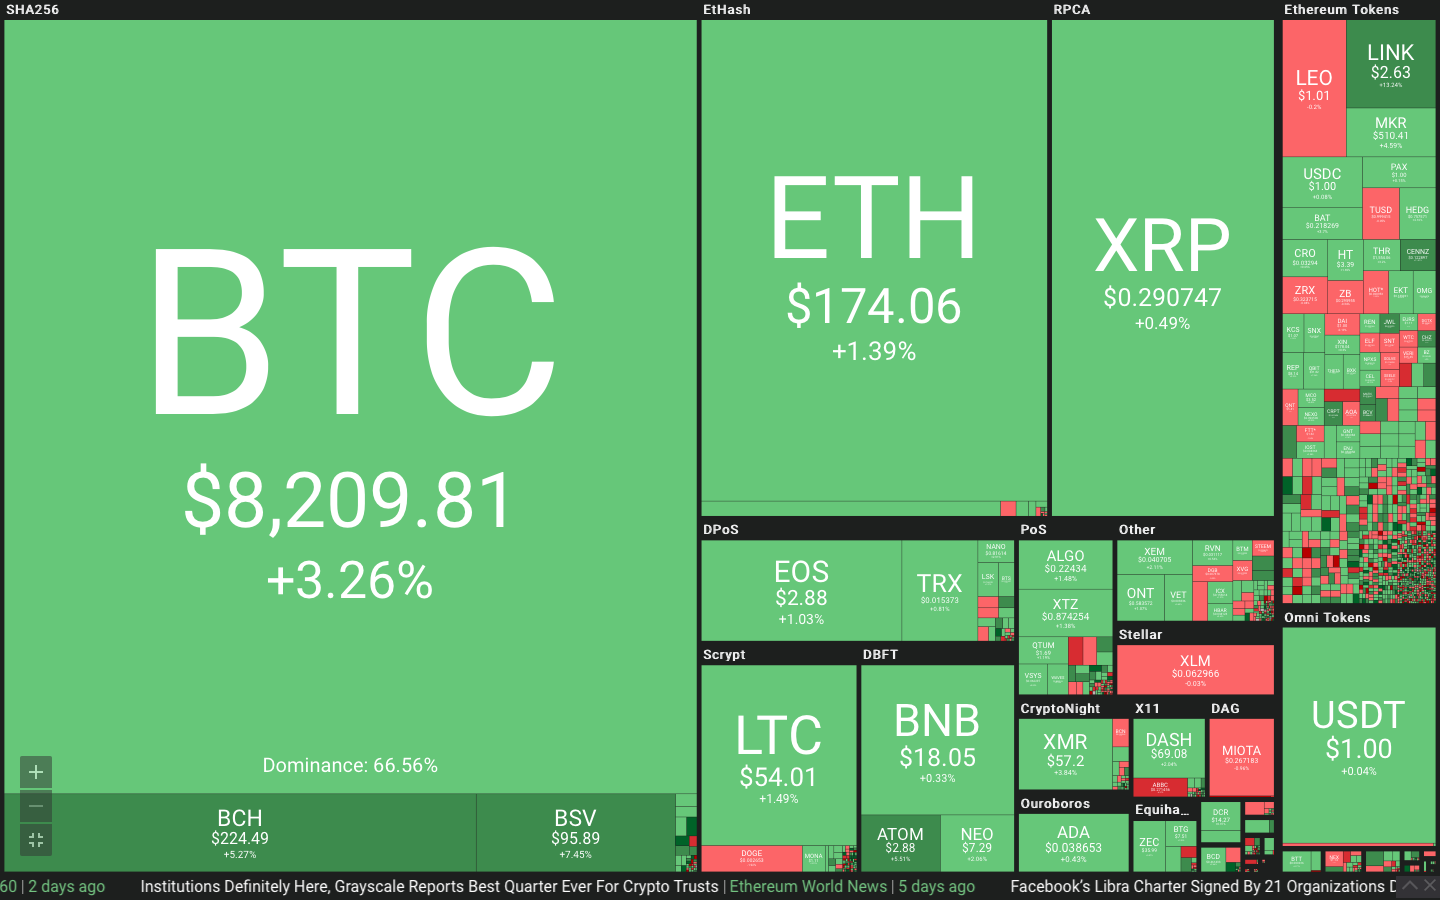 The market turns green; Bitcoin price is over $ 8,200